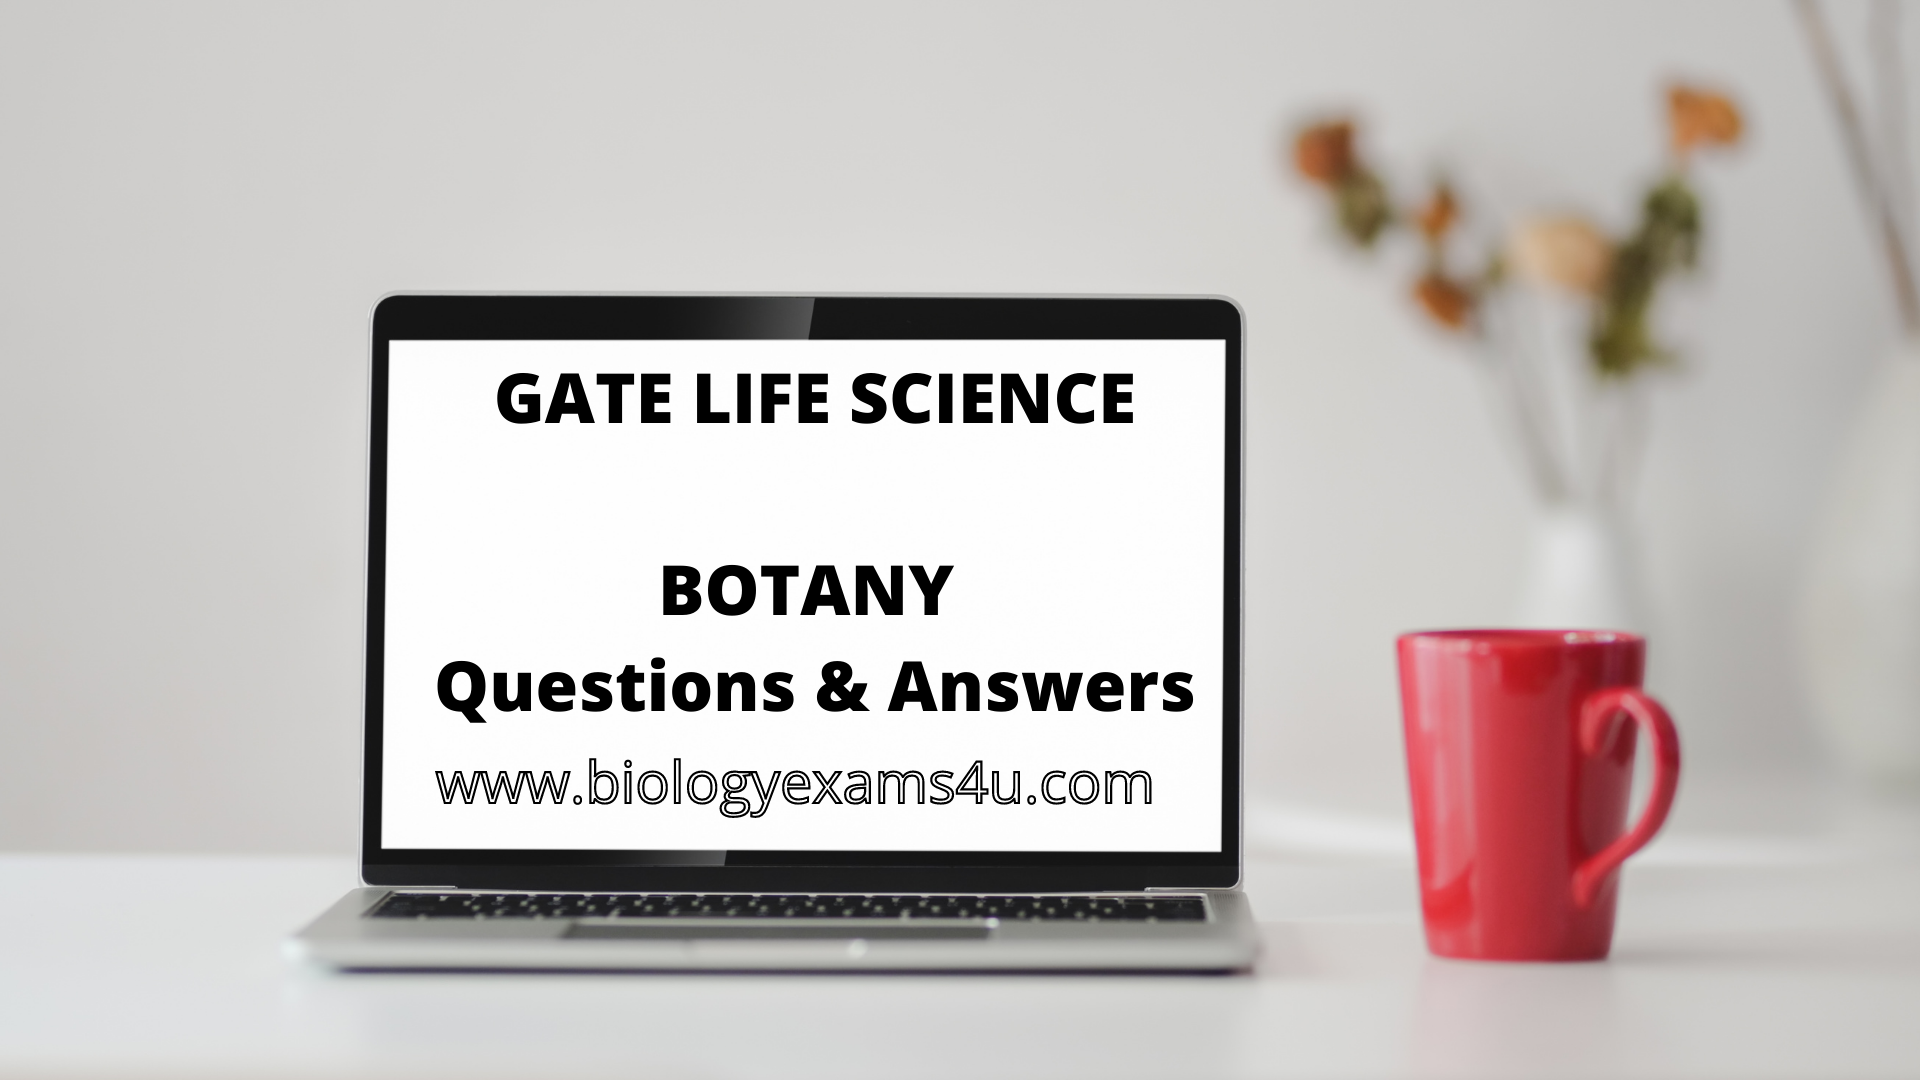 GATE Life science - Botany Previous Questions and Answers